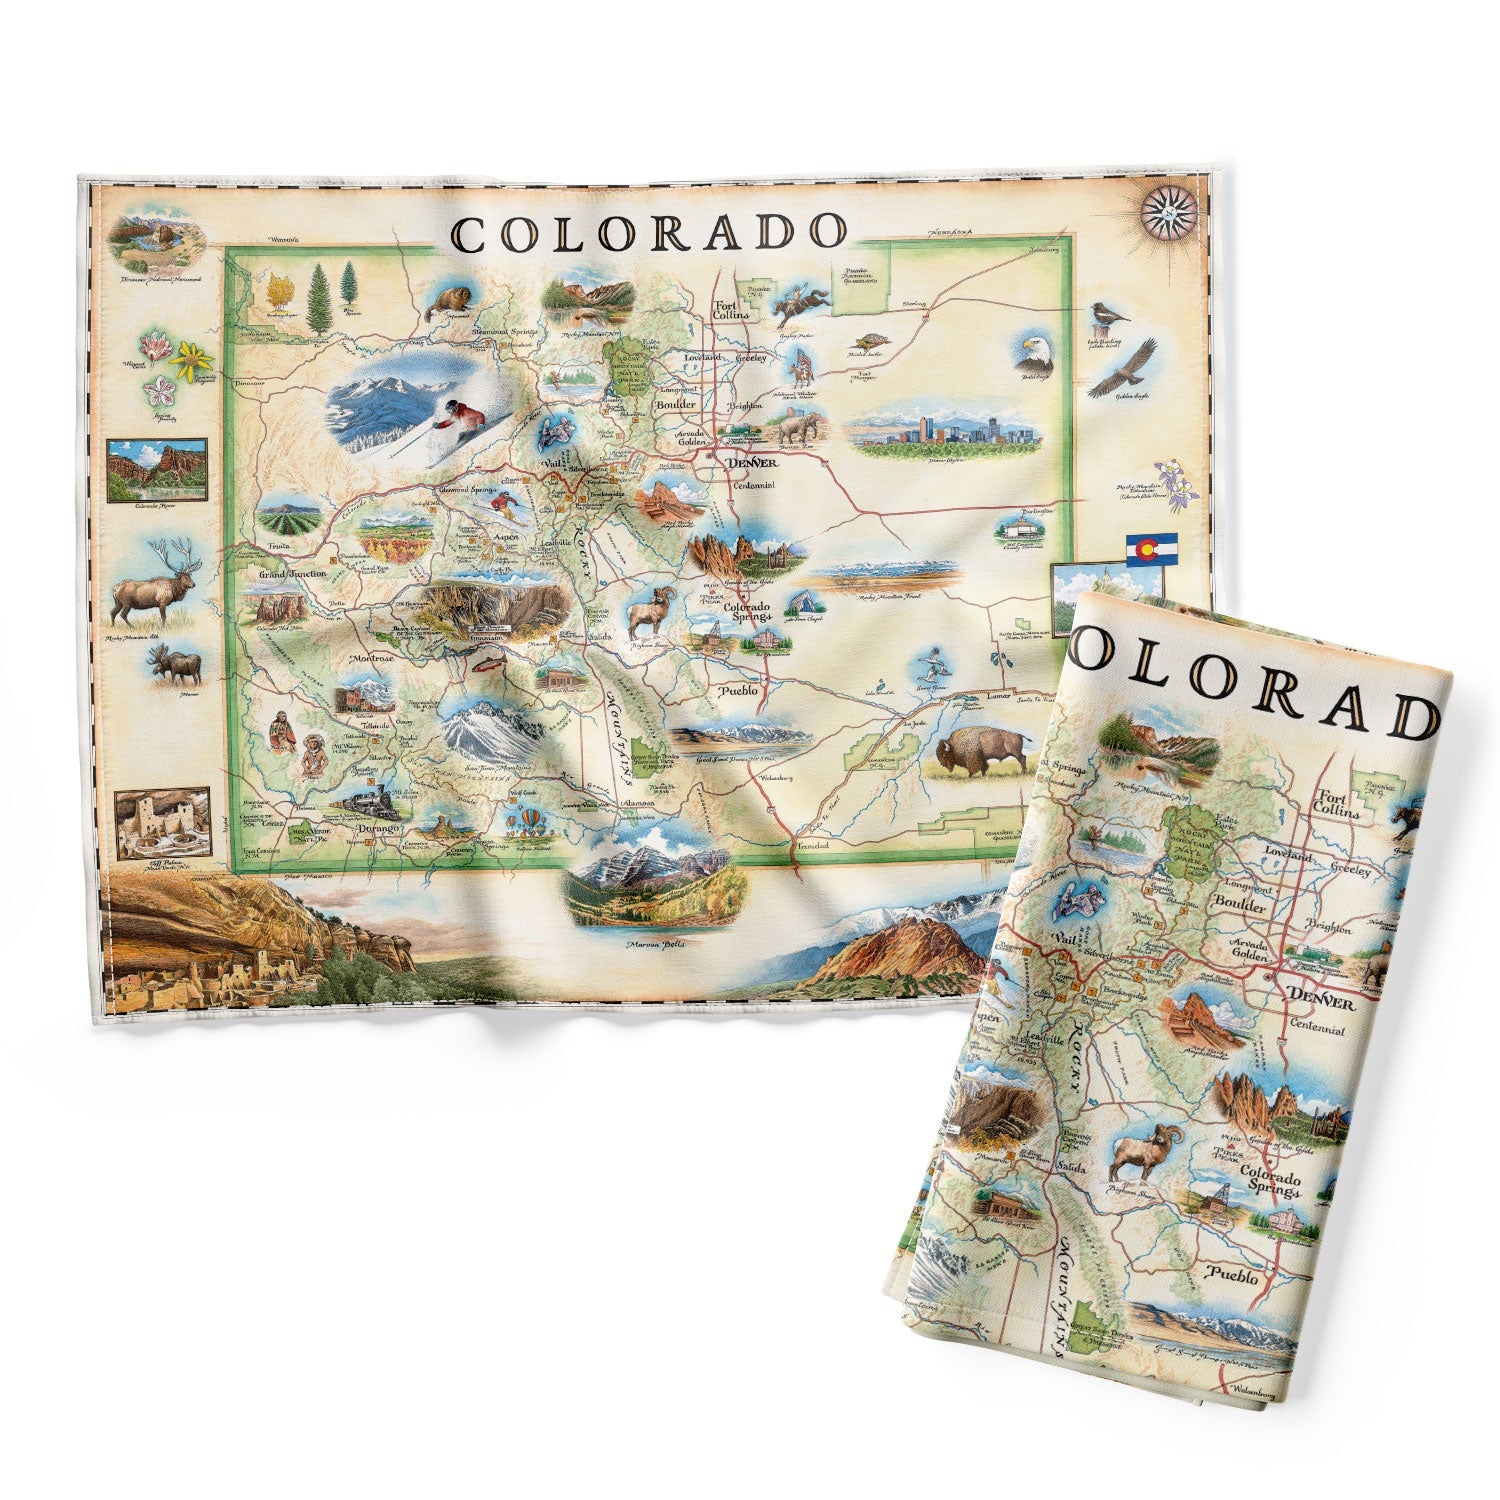 Colorado state map kitchen dishwashing towel in earth tones, blue and green. Featuring illustrations of cities like Denver, Fort Collins, Loveland, Colorado Springs, Aspen, and Durango. The map also features flora and fauna such as elk, moose, and marmot. It also depicts the indigenous peoples of the area, Navajo and Hopi. Other illustrations include Maroon Bells, the Black Canyon of the Gunnison, and the Denver skyline.